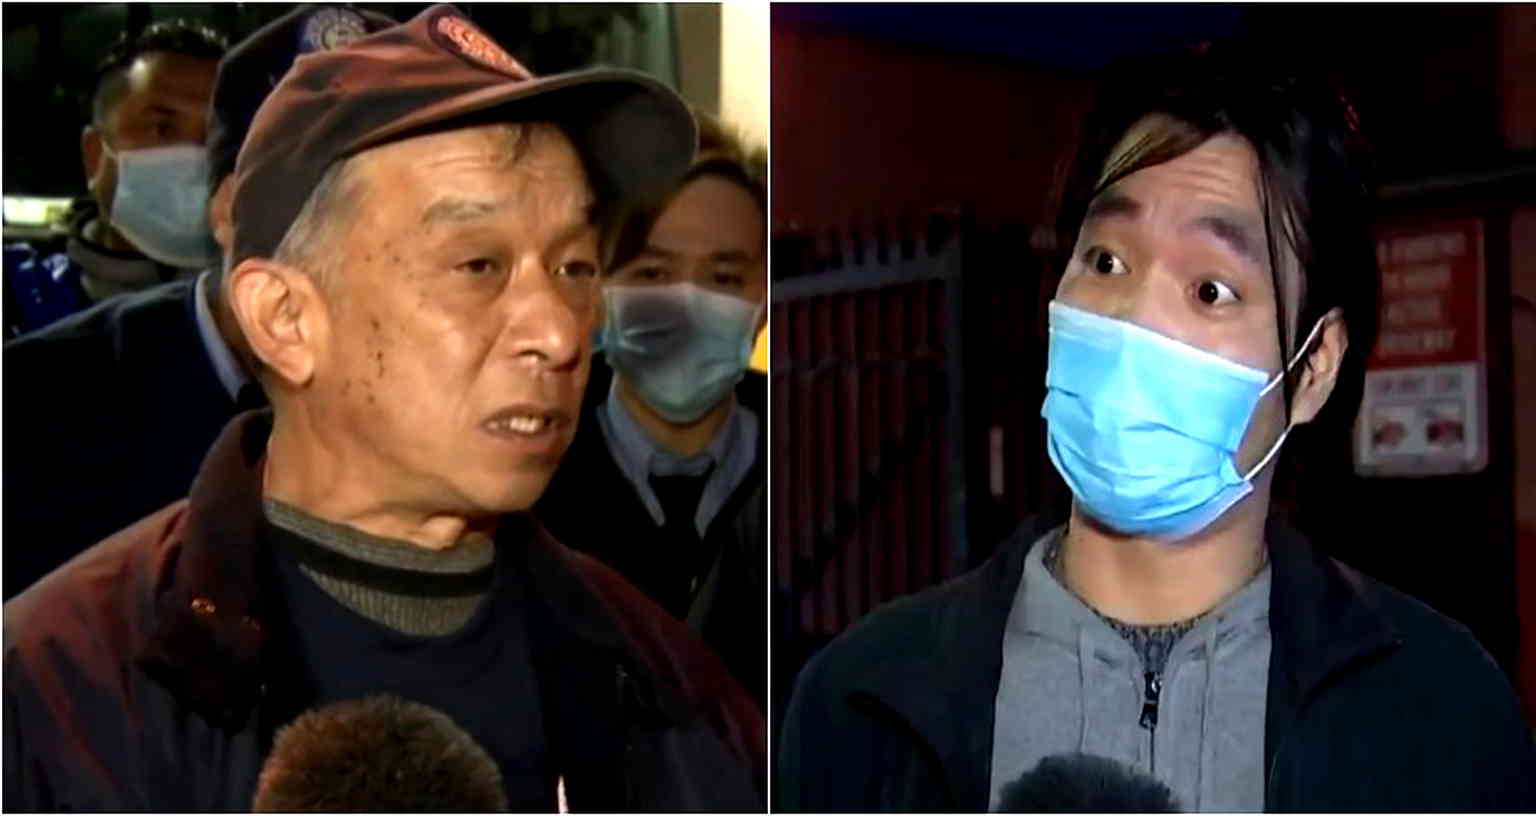 Bus Driver, Kind Stranger Attacked After Stopping Assault on Elderly Asians in NYC